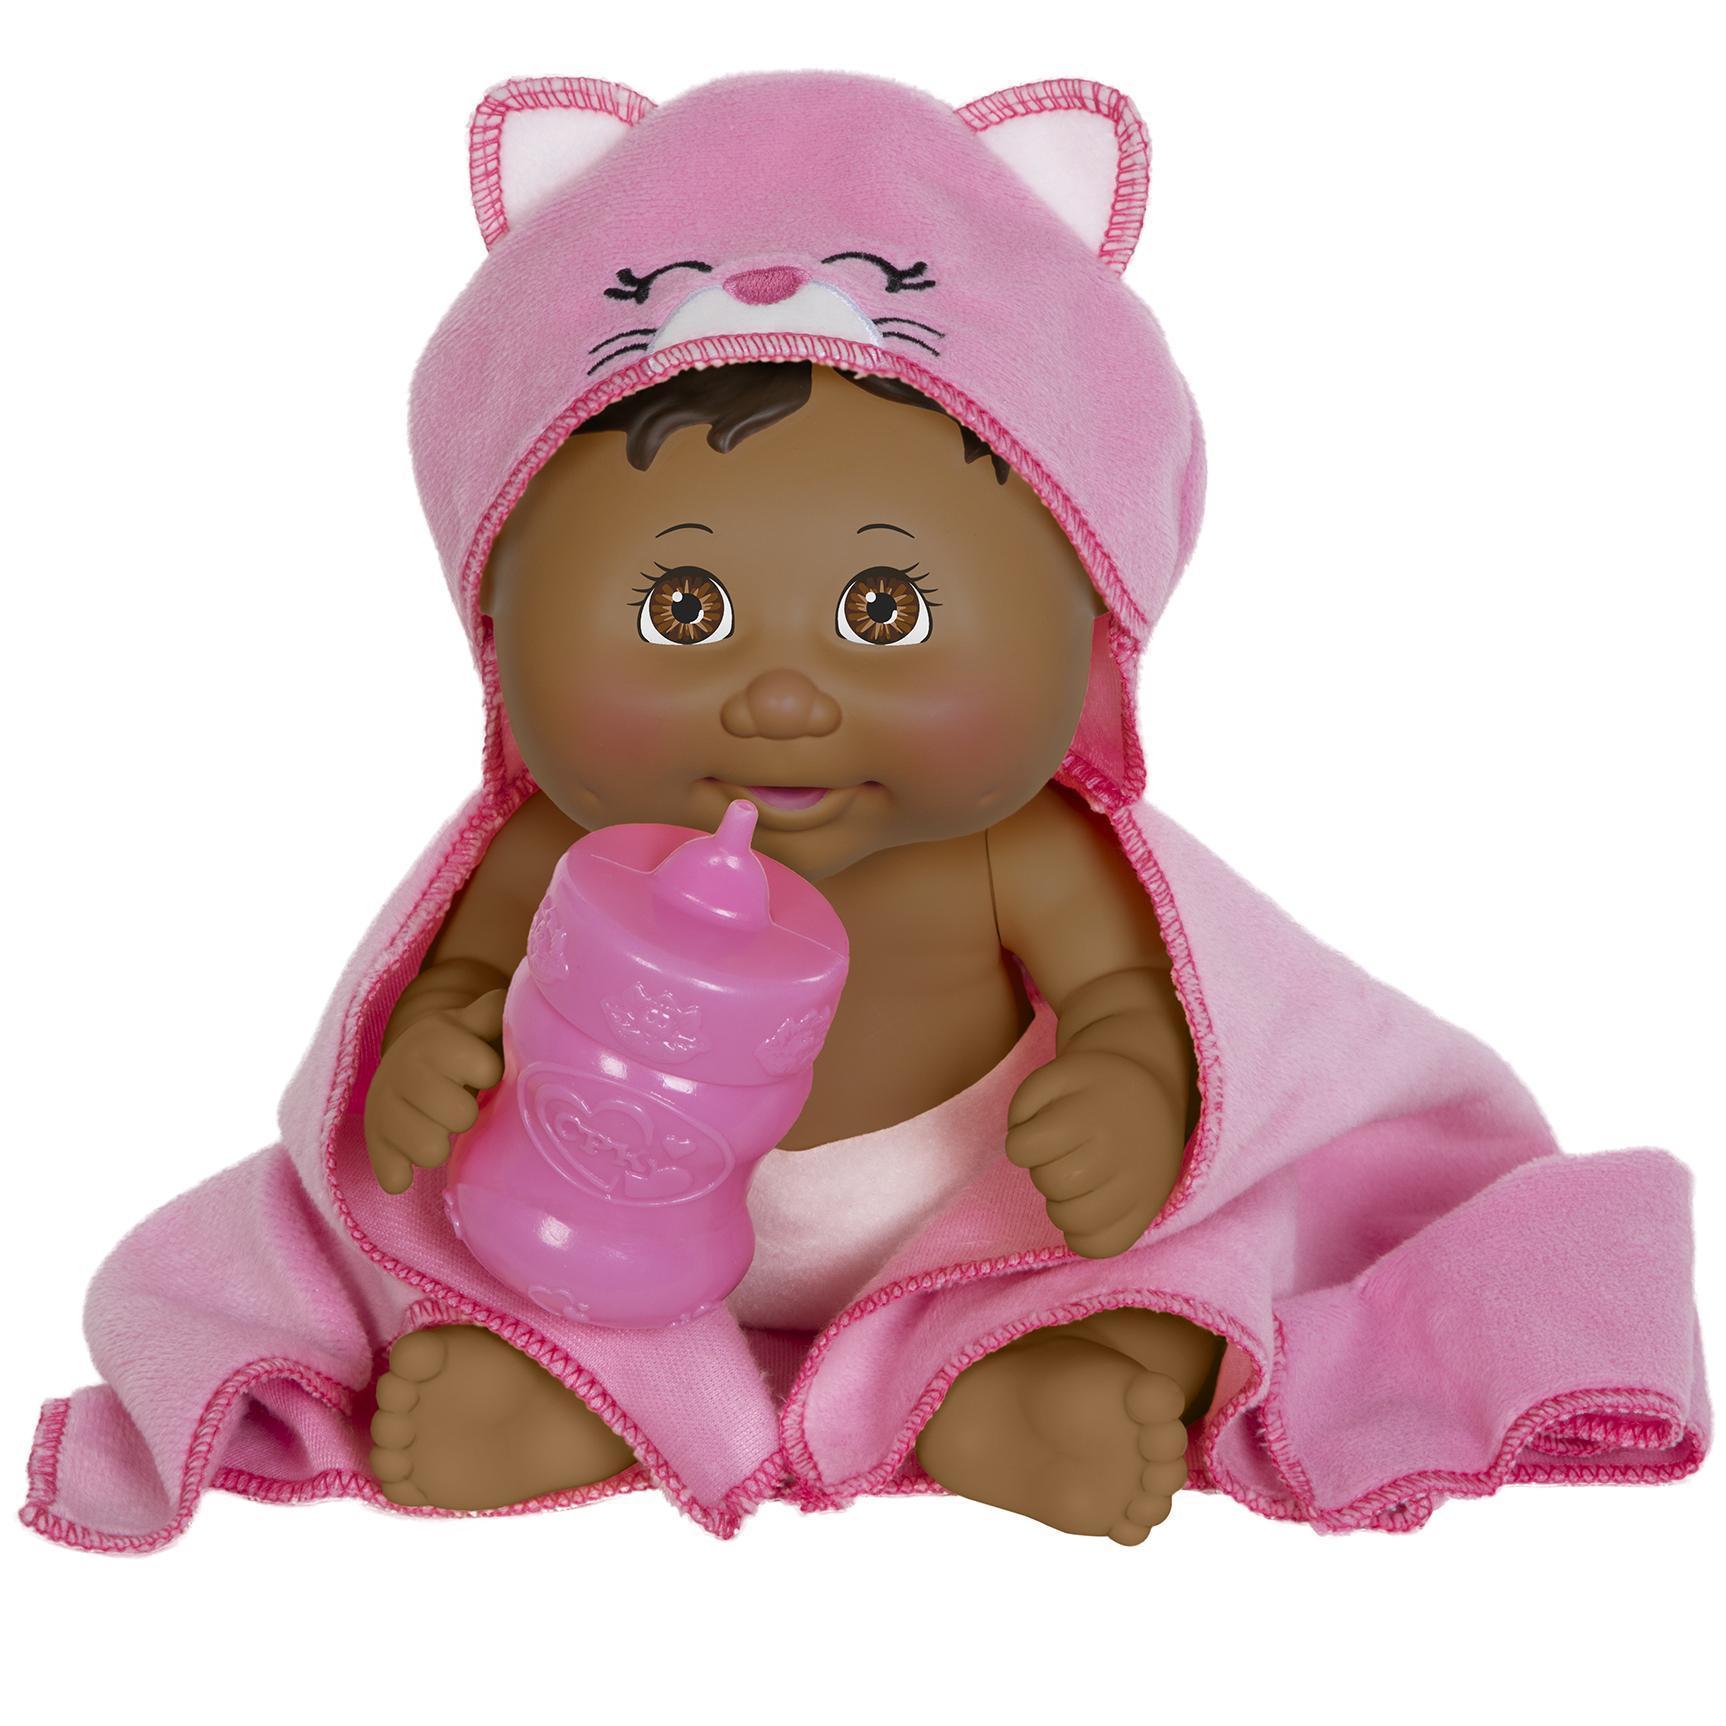 9" Deluxe Swaddle 'n Love DRK BRO Pink Fashion